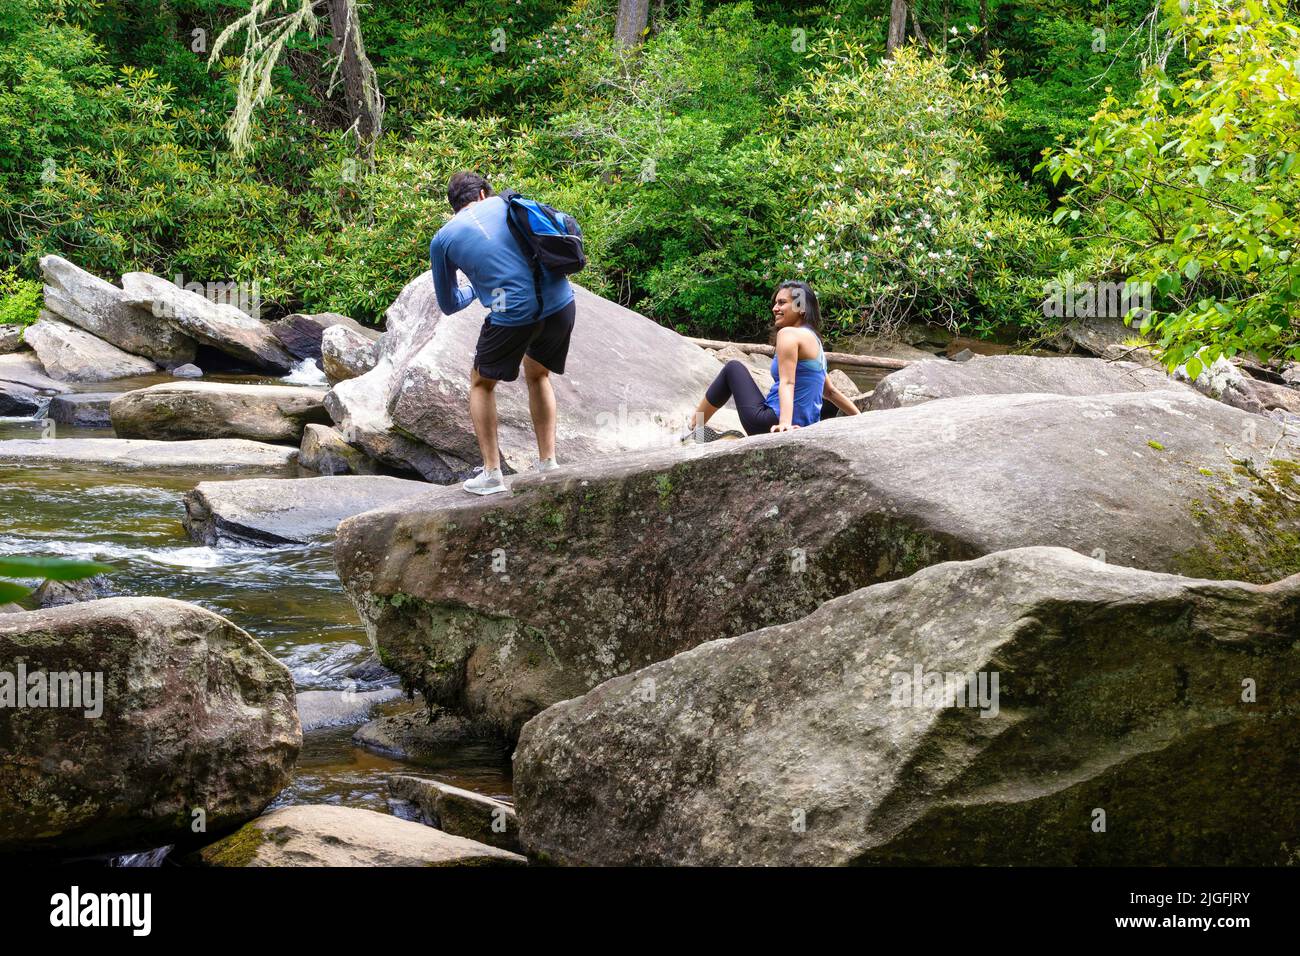 Brevard, North Carolina, USA - June 25, 2022:  Big boulders strewn along and in the Little River in Dupont Forest, North Carolina. Stock Photo